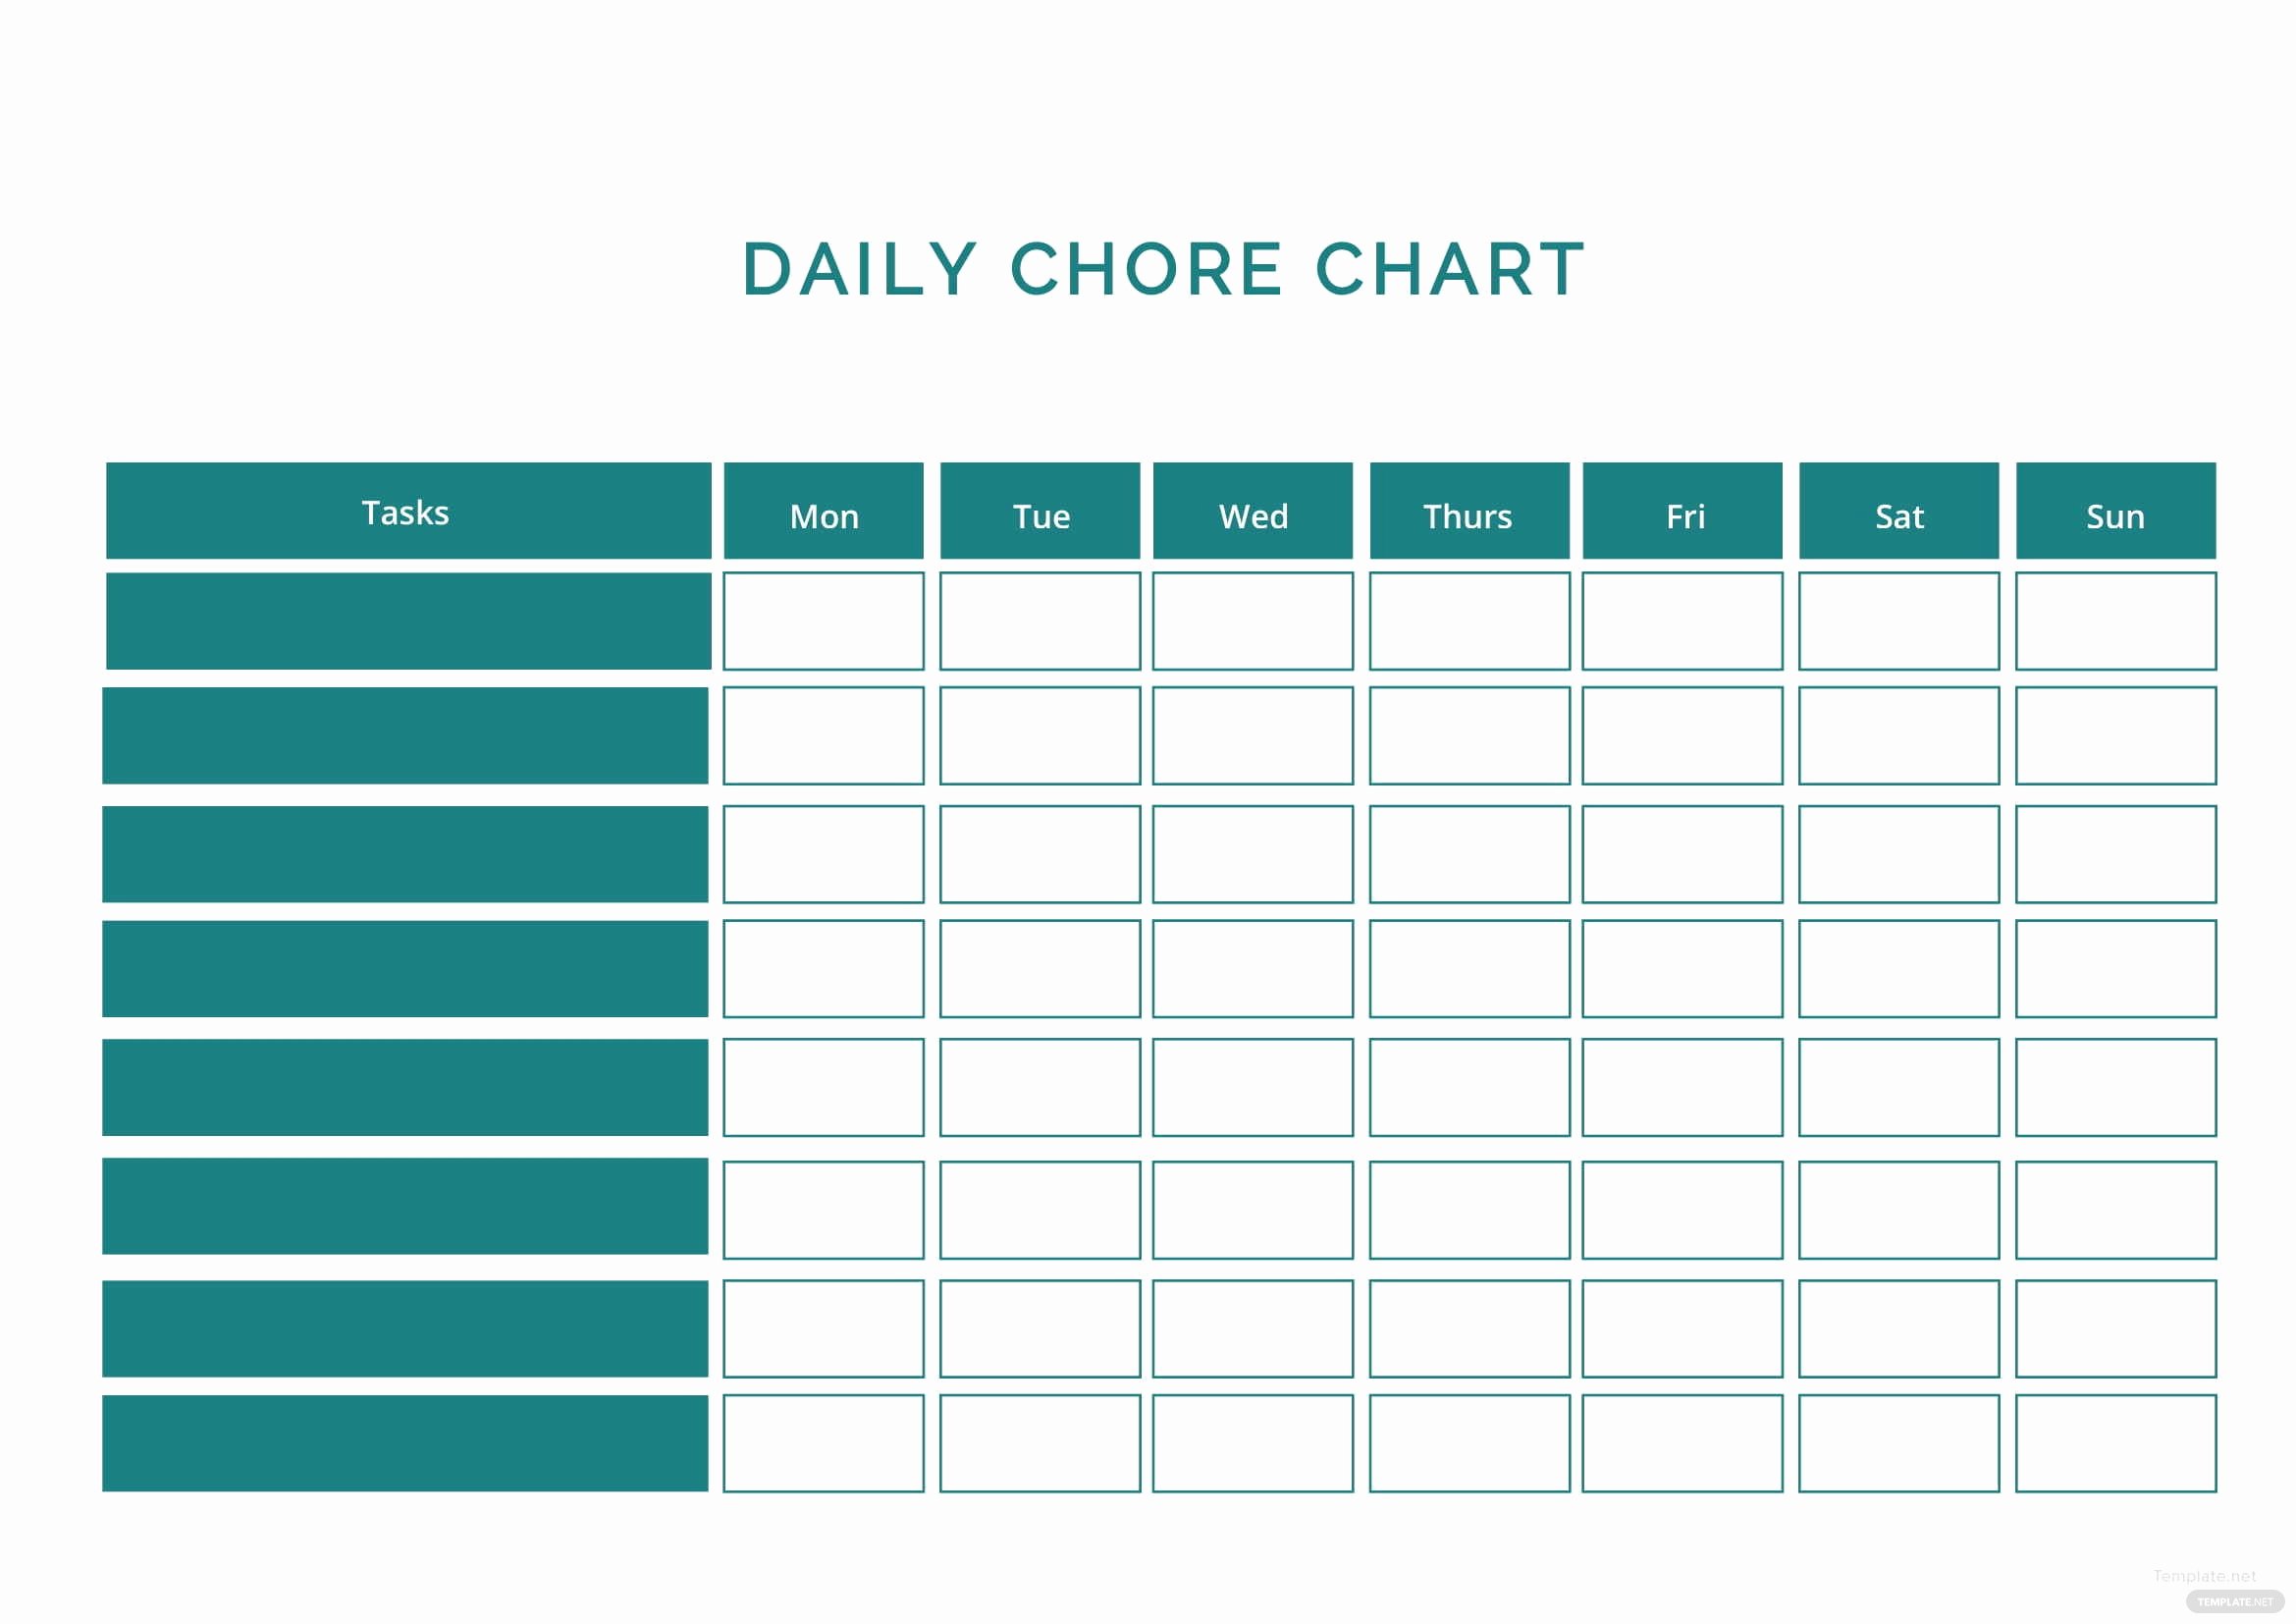 Daily Chore Chart Template New Download Gantt Chart for A Car Wash